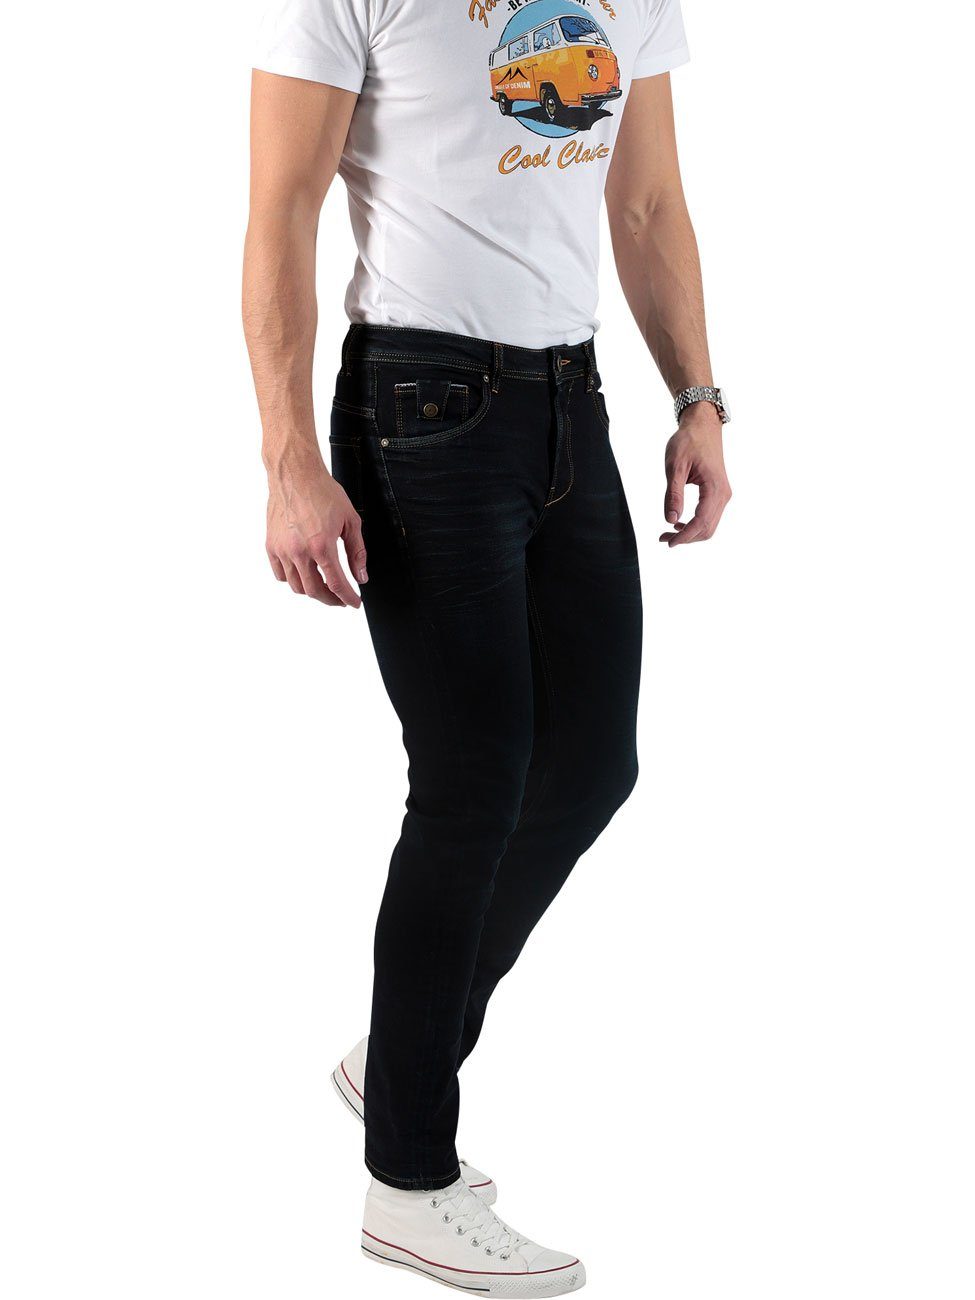 Ricardo Jeanshose Straight-Jeans mit of Denim Miracle Stretch